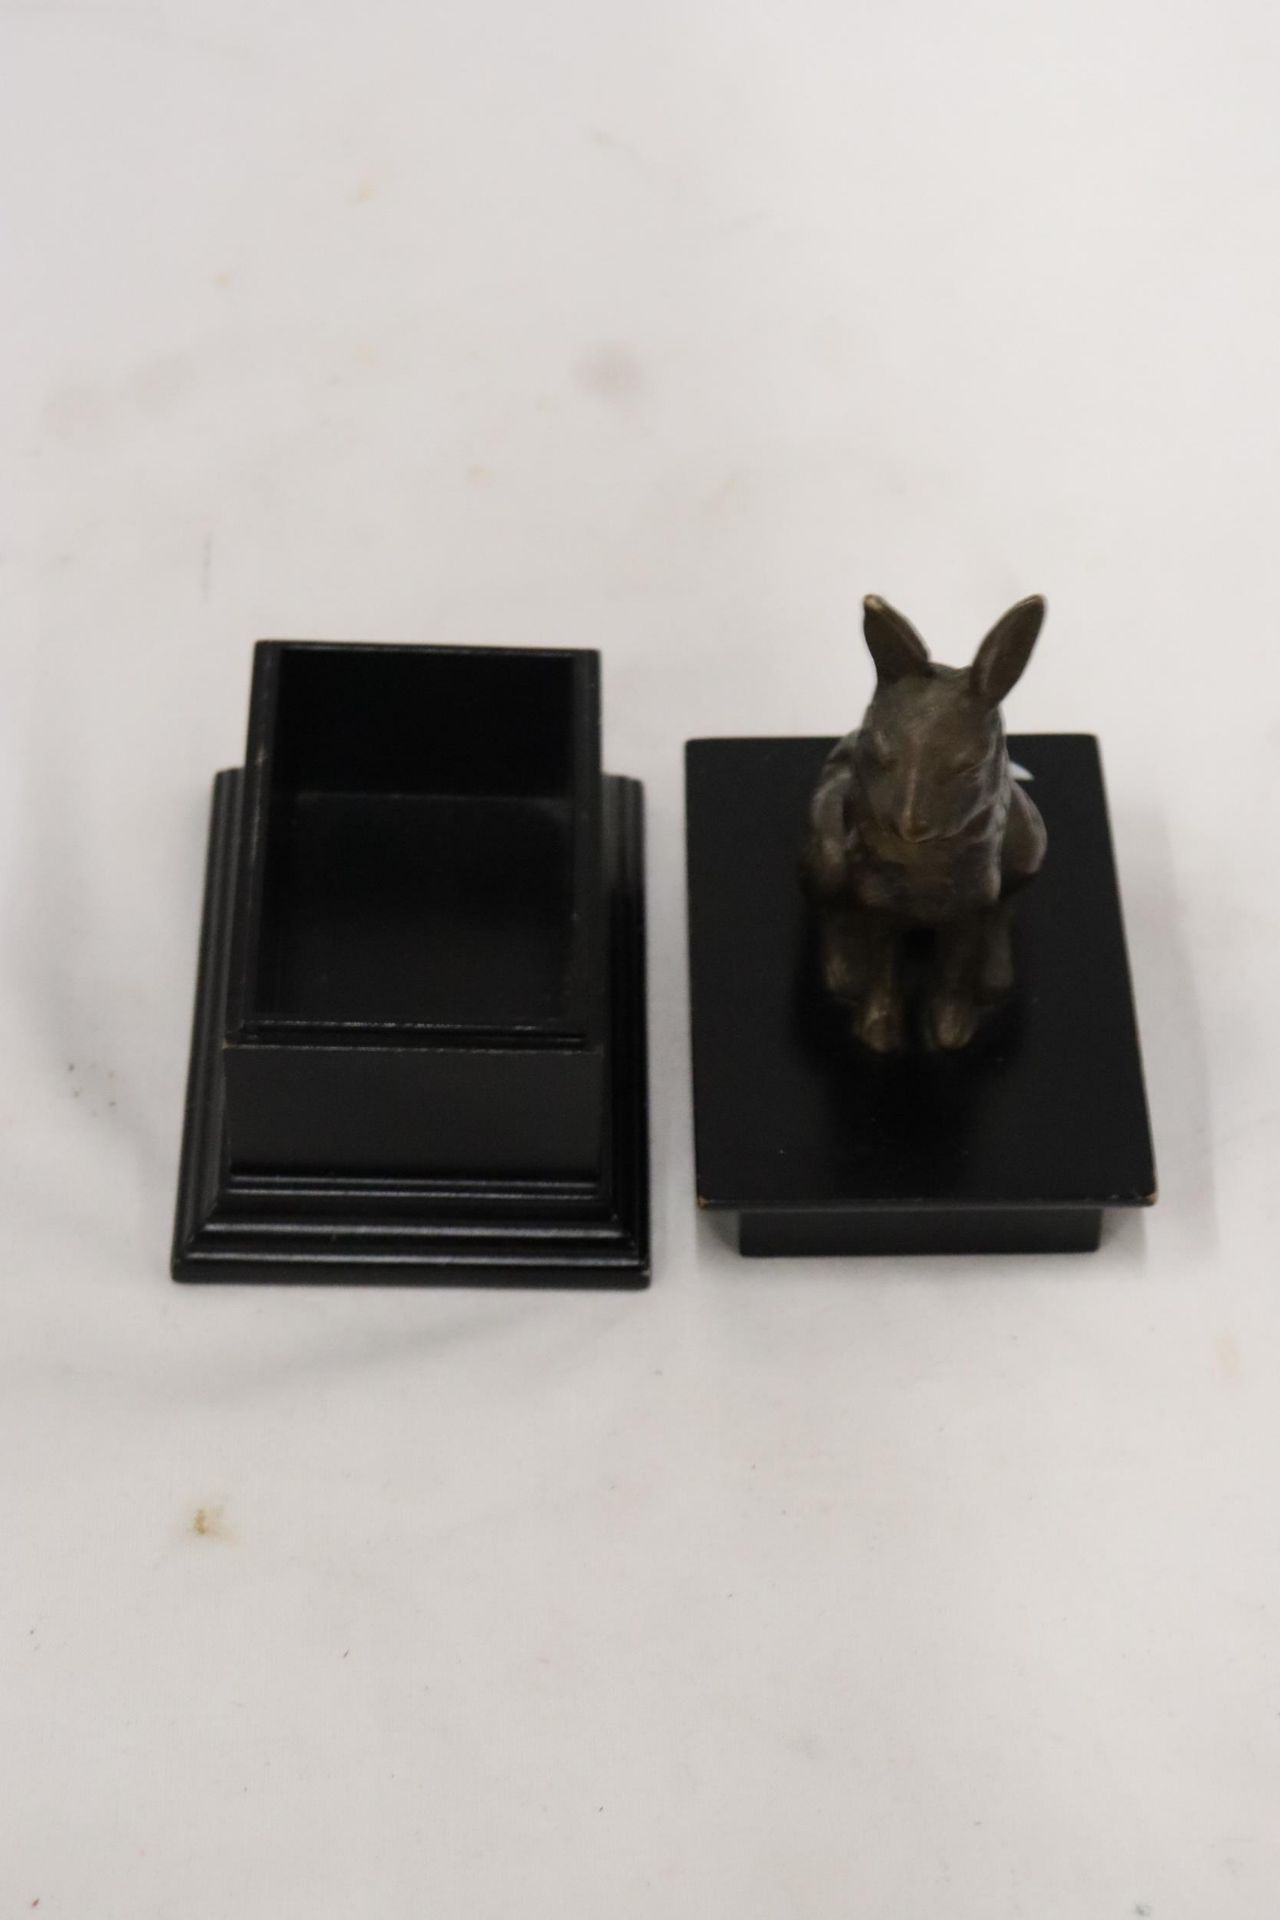 A FIGURE OF A HARE SITTING ON A WOODEN TRINKET BOX - Image 6 of 6